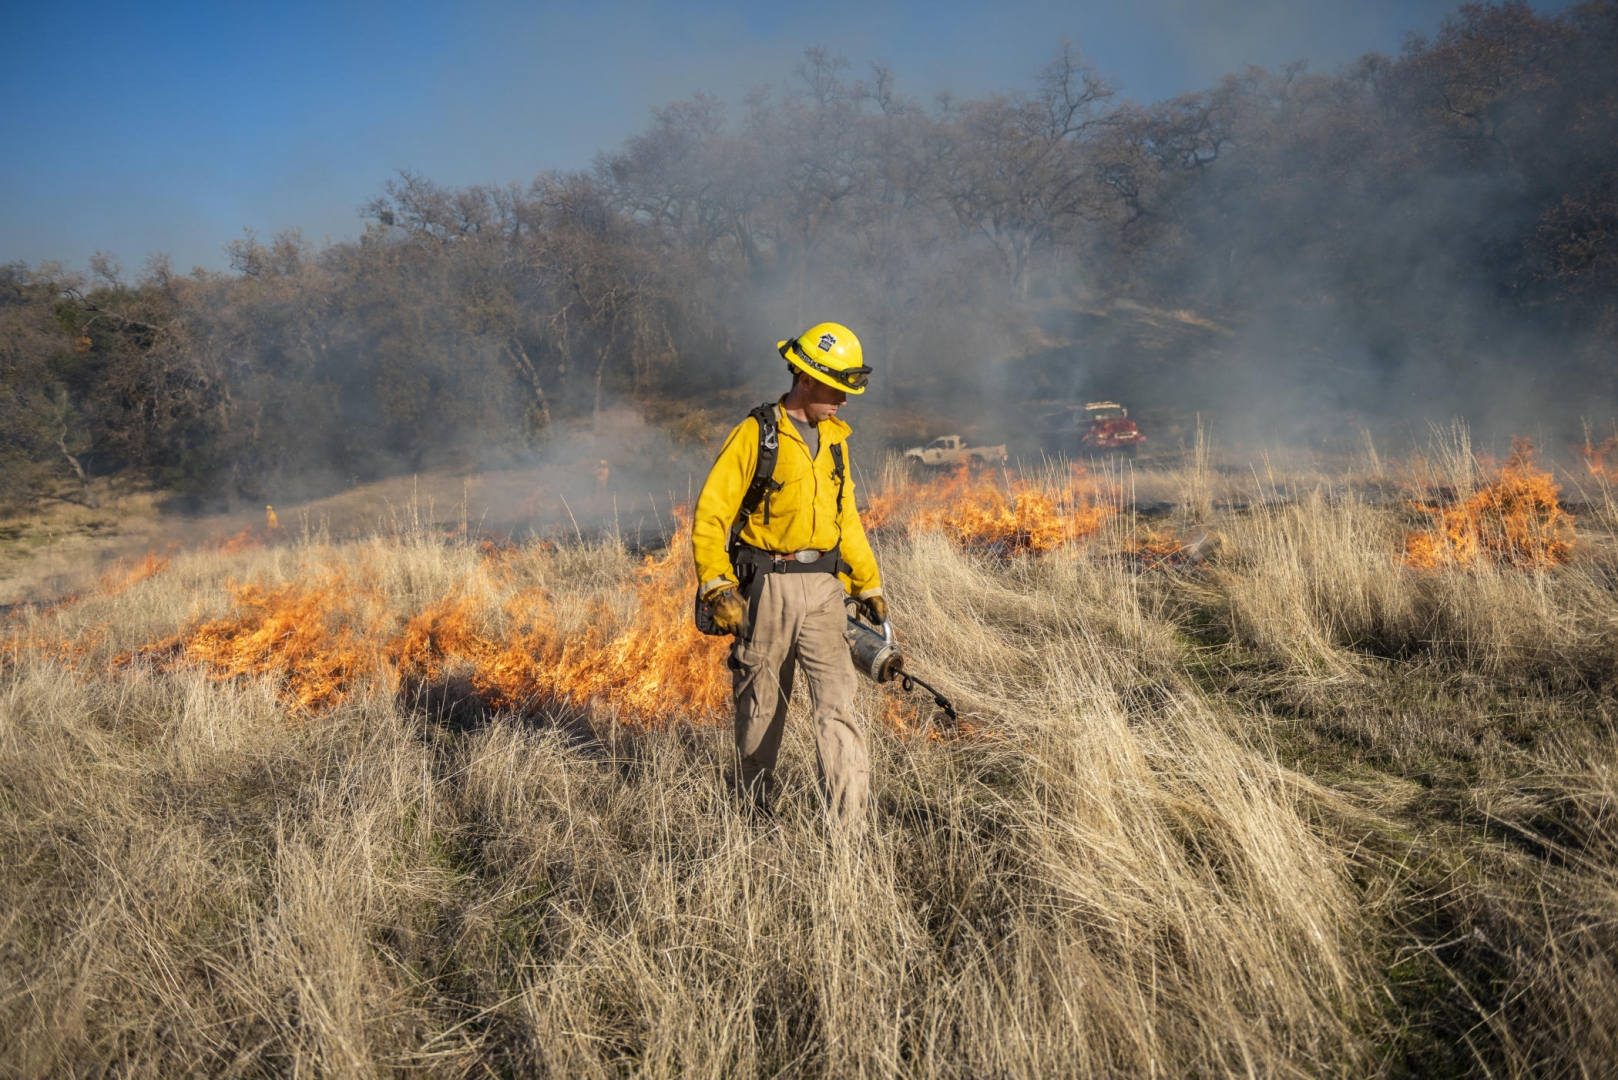 Mitch Bramford walks through knee-high grass with a drip torch in hand, igniting the vegetation as flames burn behind him.